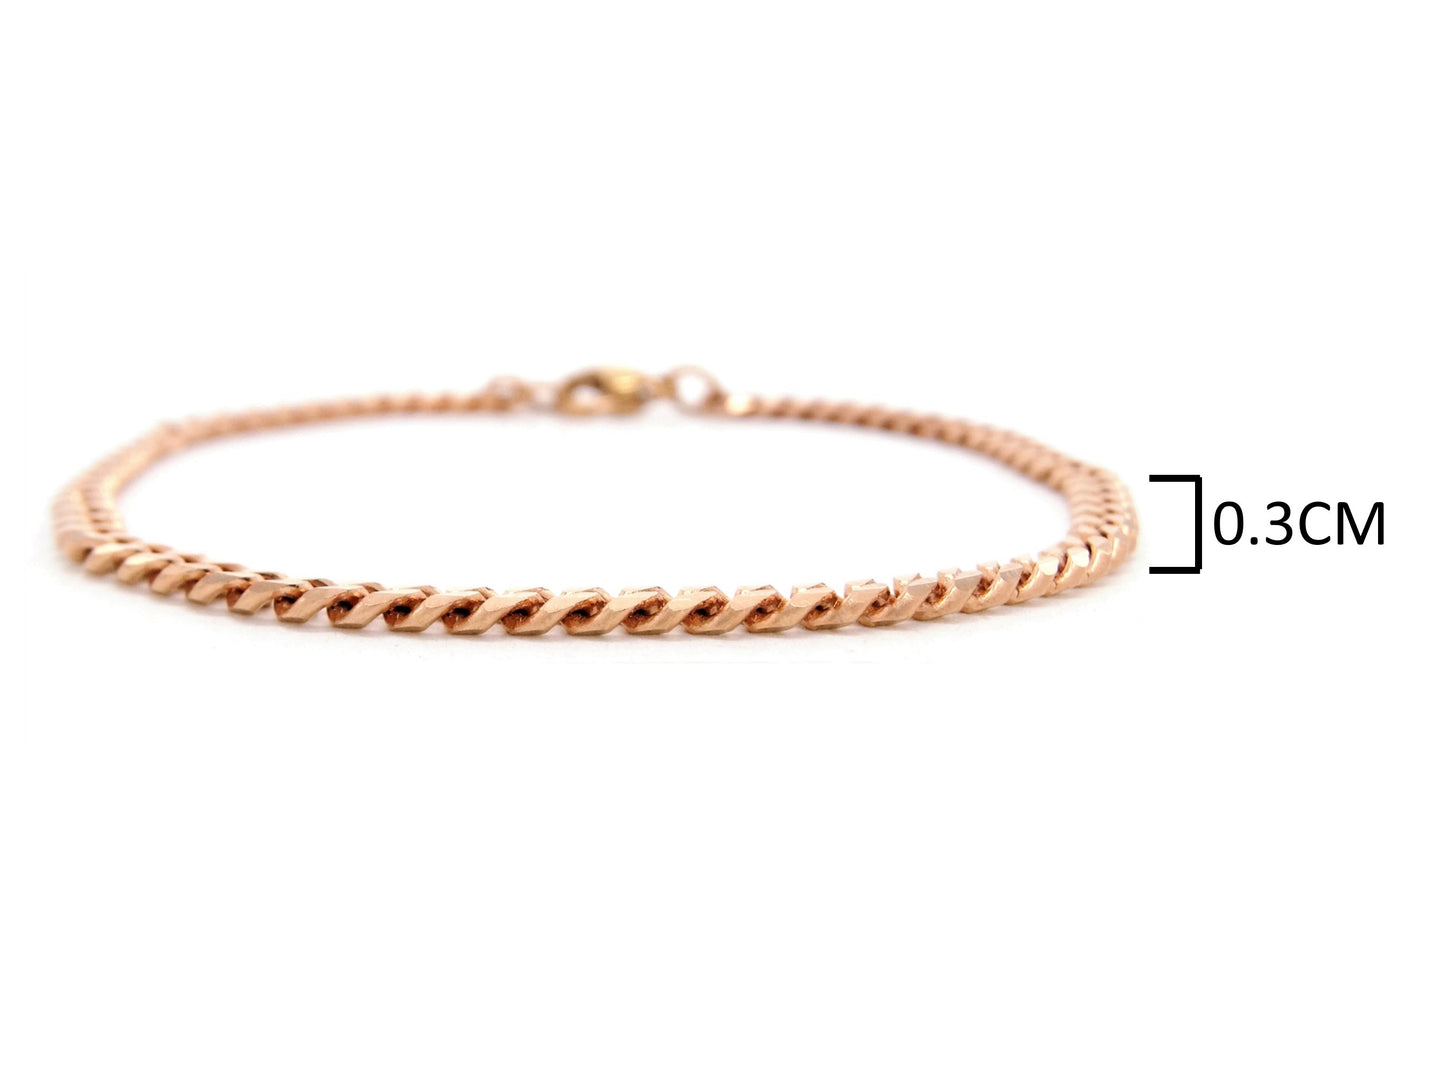 Rose gold thin chain anklet MEASUREMENT